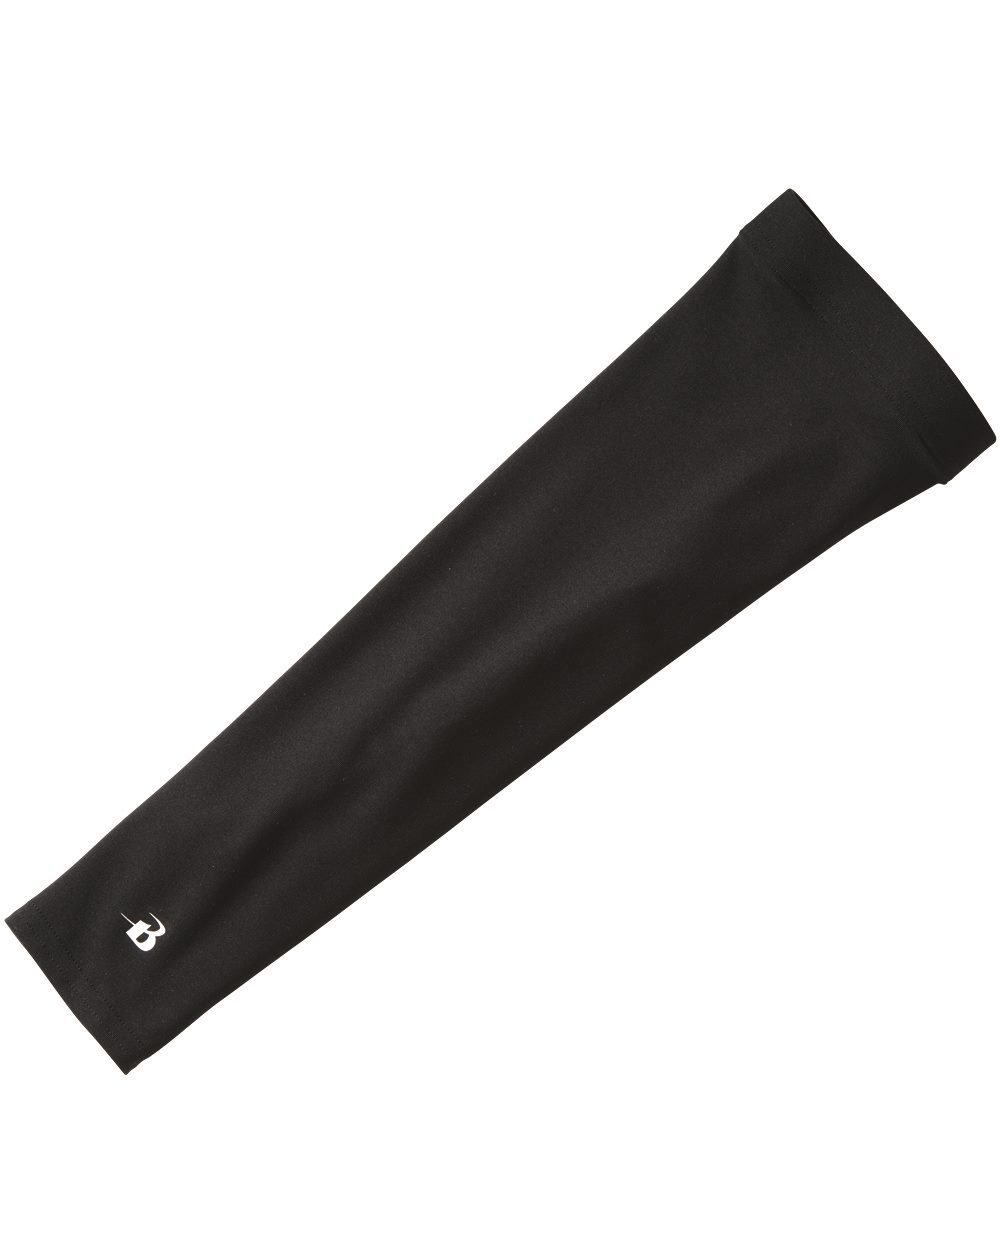 B200 Badger Youth Performance Compresion Fit Arm Sleeve 